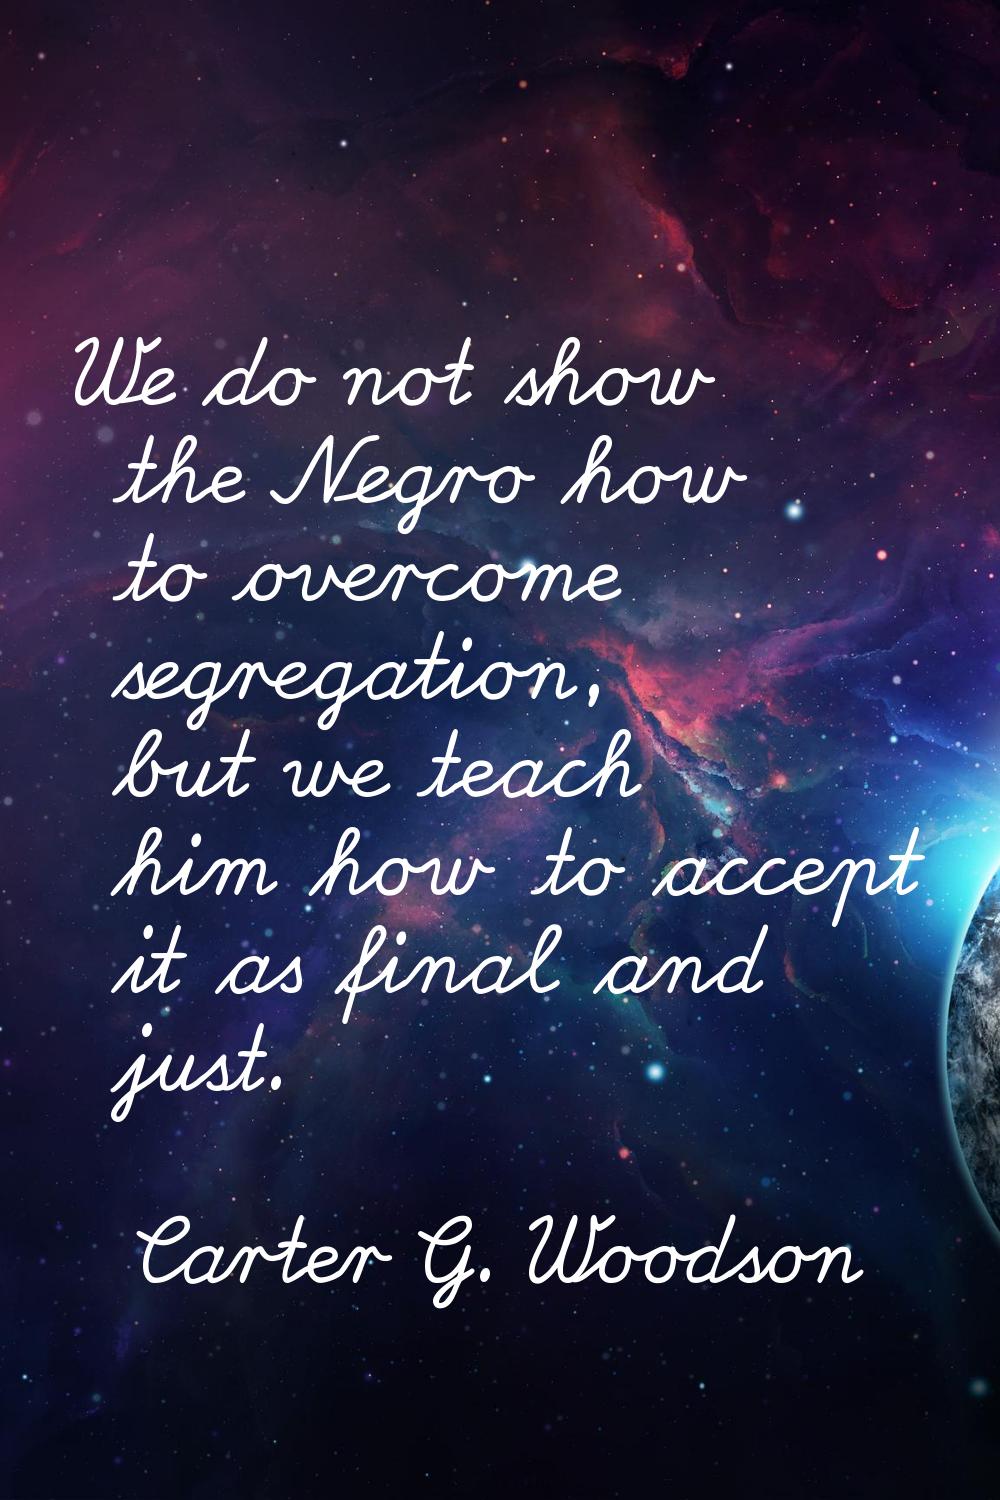 We do not show the Negro how to overcome segregation, but we teach him how to accept it as final an